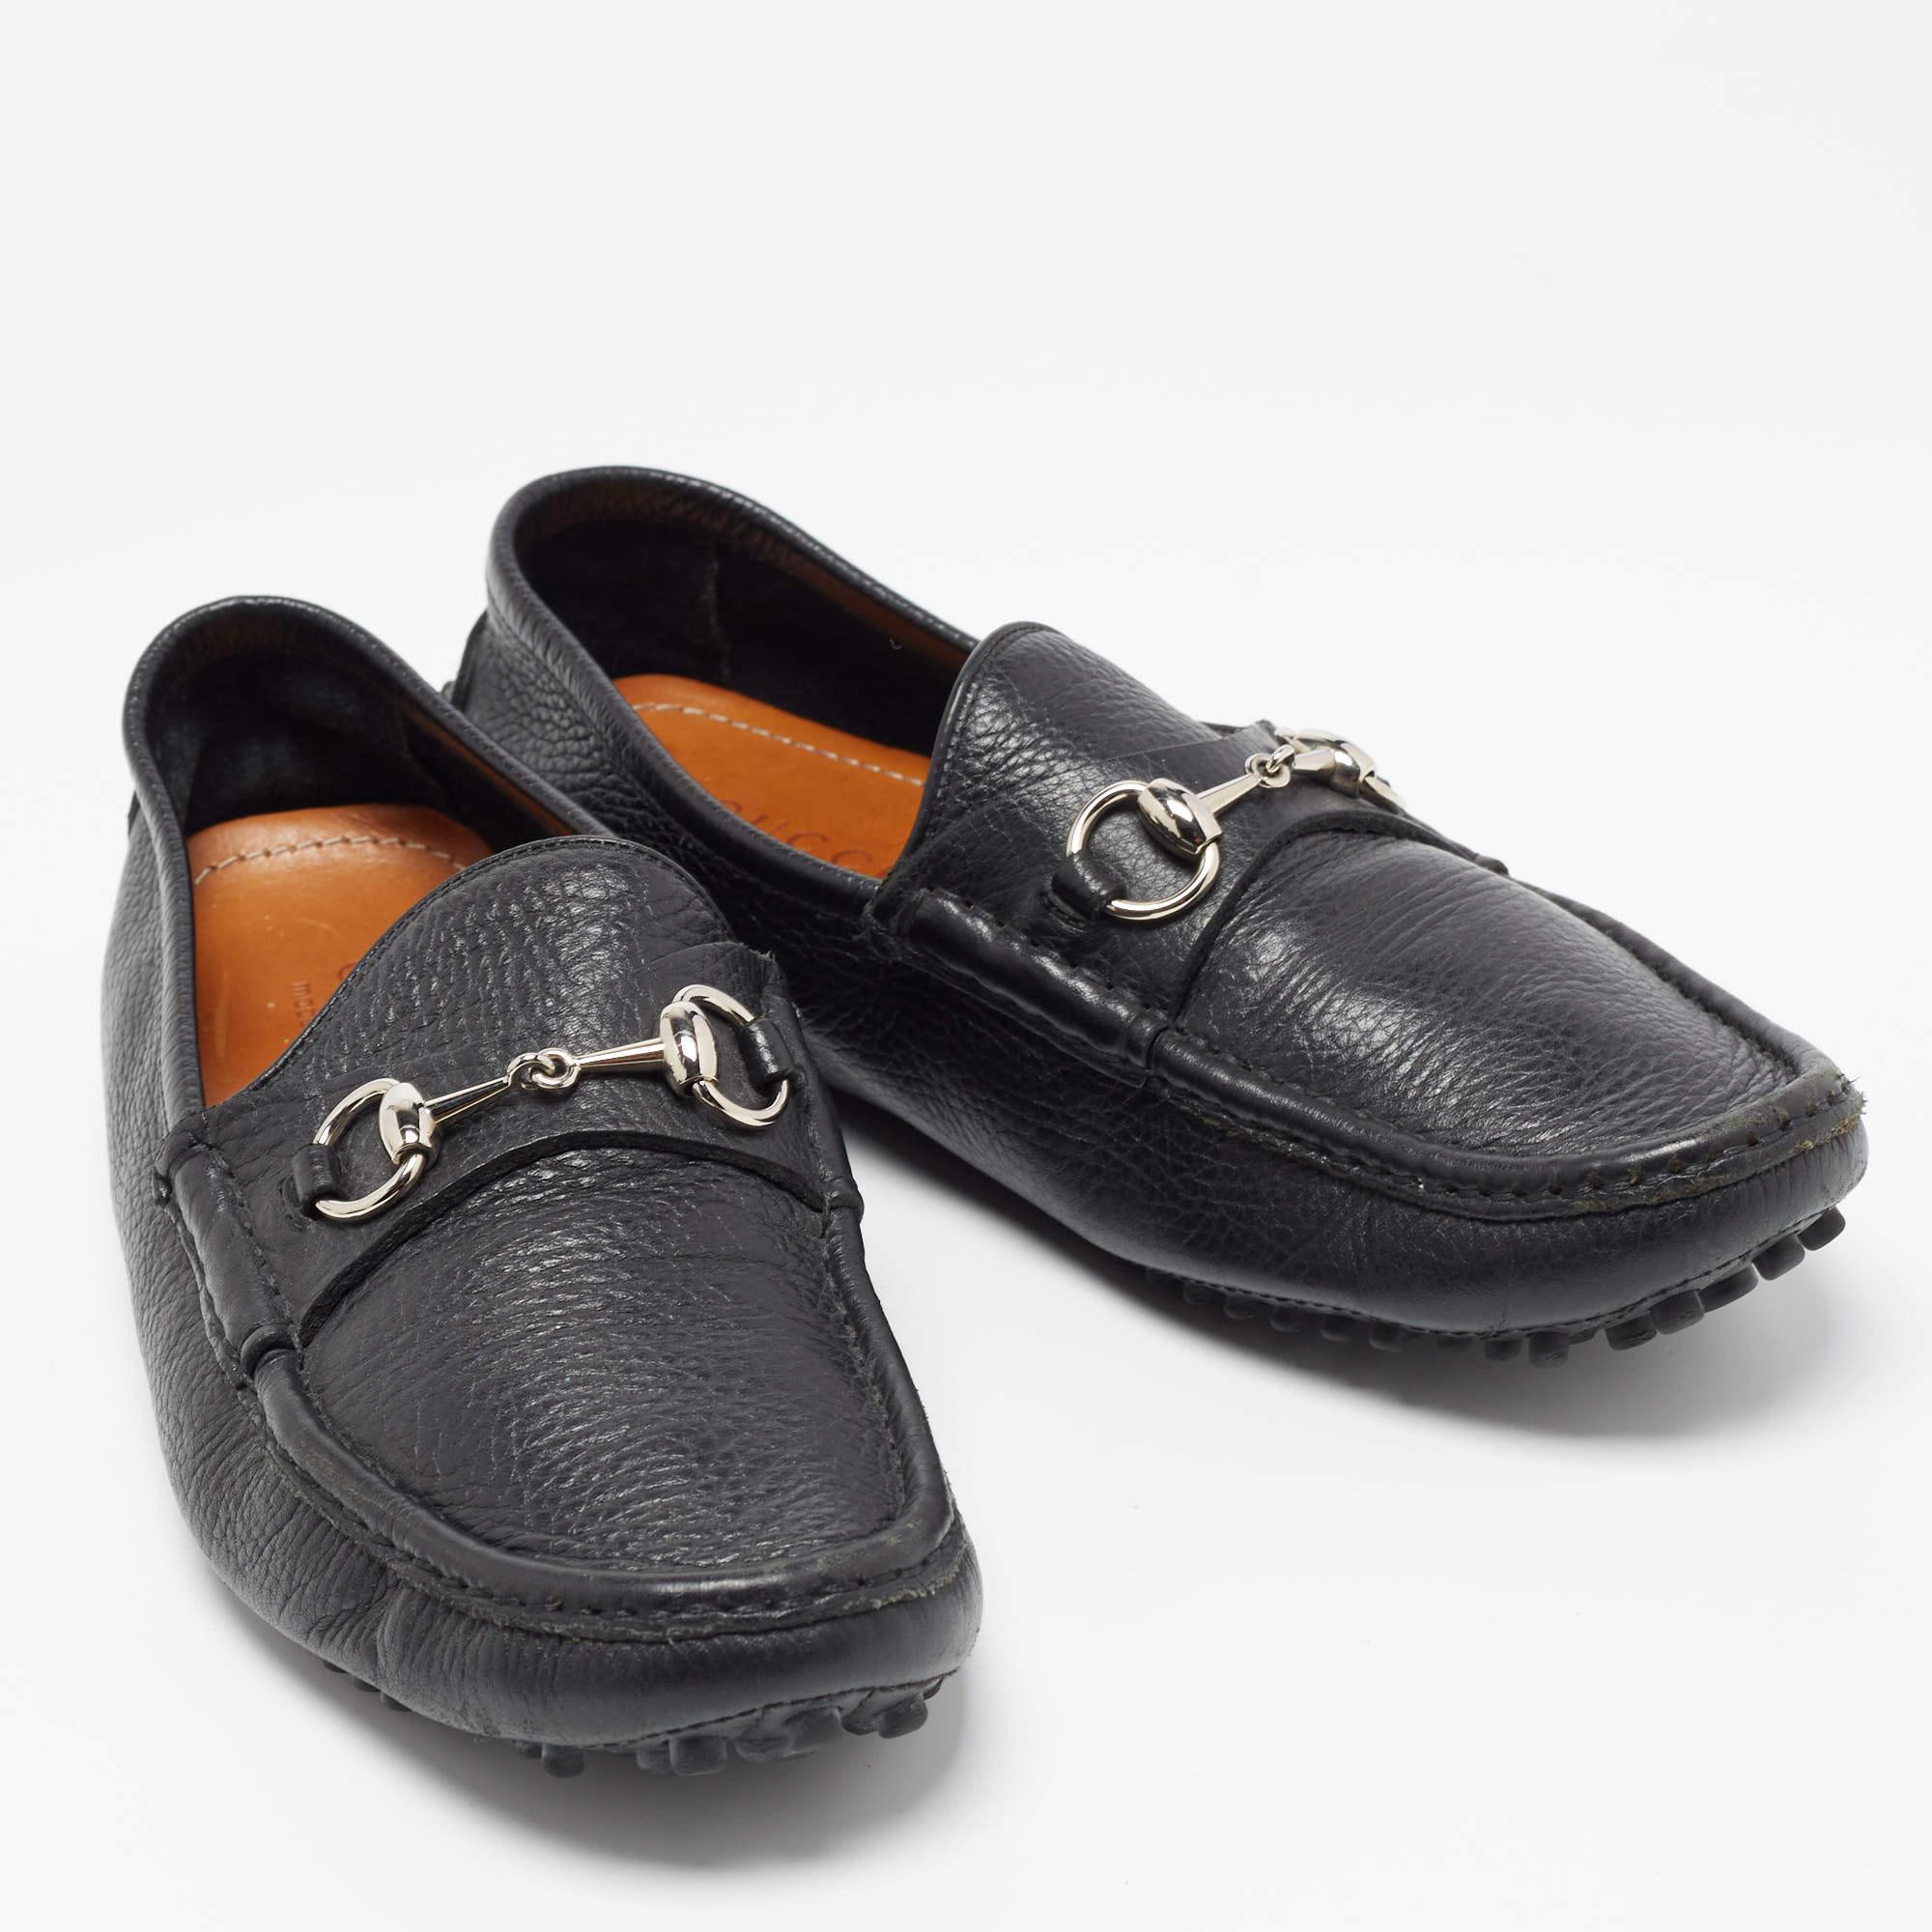 Gucci Black Leather Horsebit Slip On Loafers Size 42 1